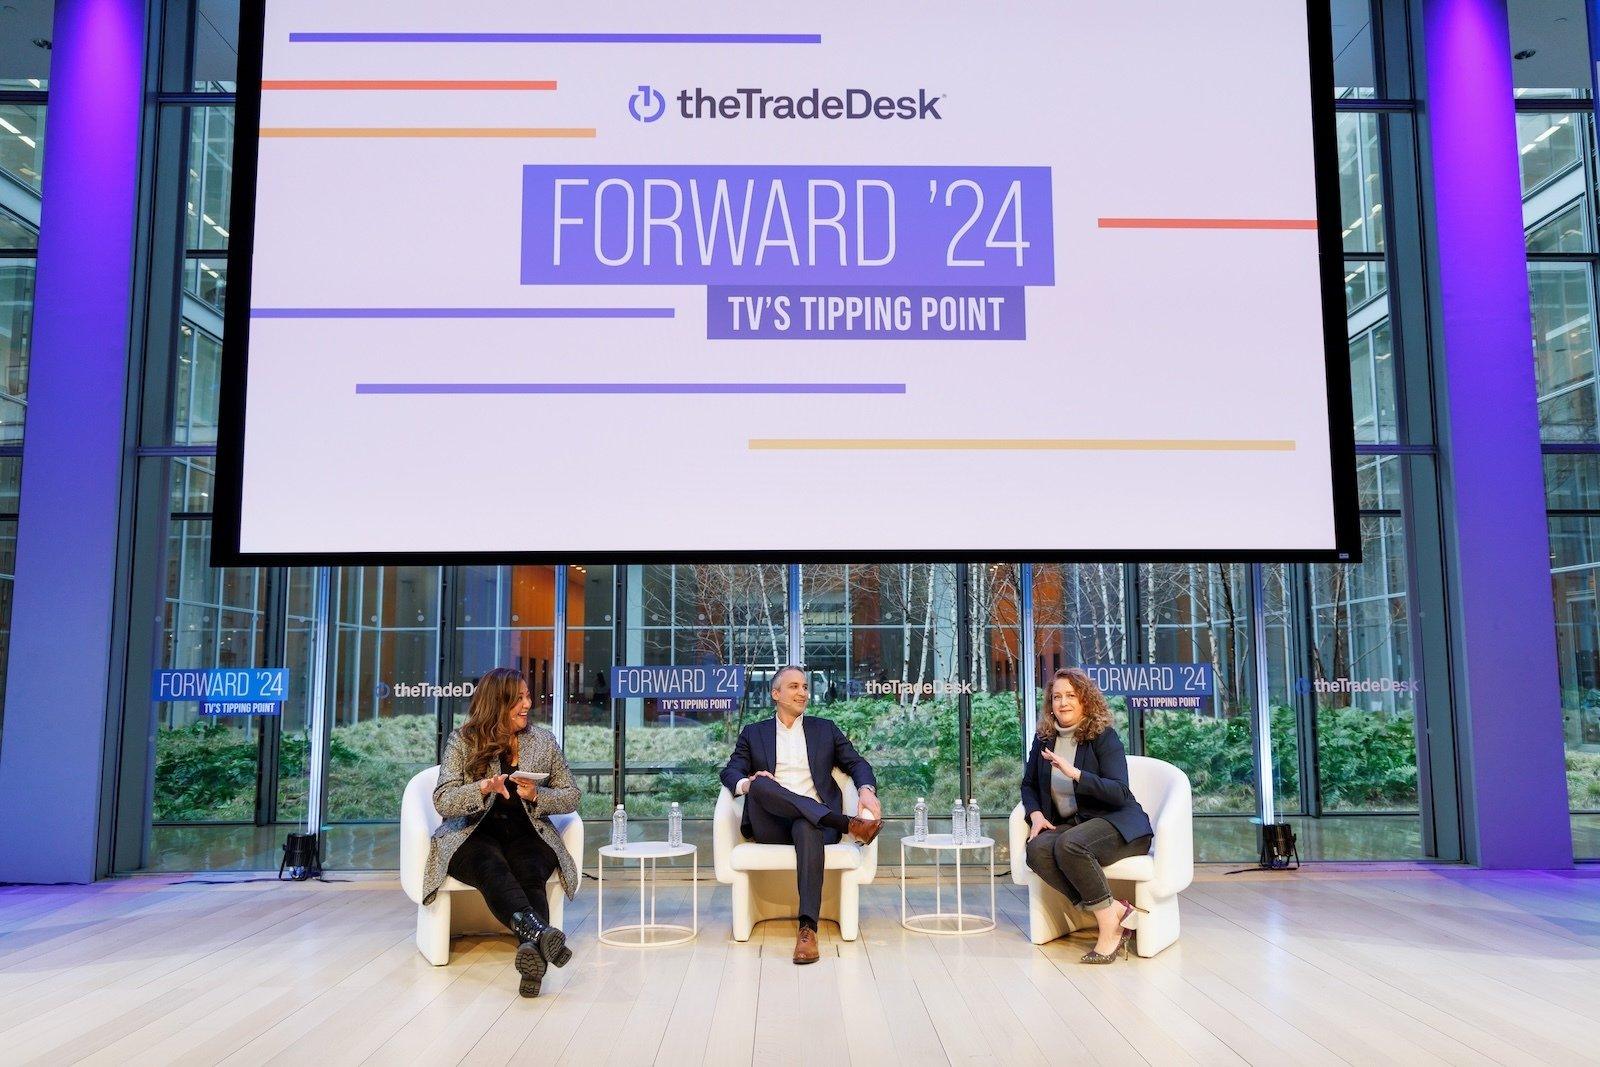 Forward '24 event hosted by The Trade Desk featuring three individuals talking in chairs in front of a screen.